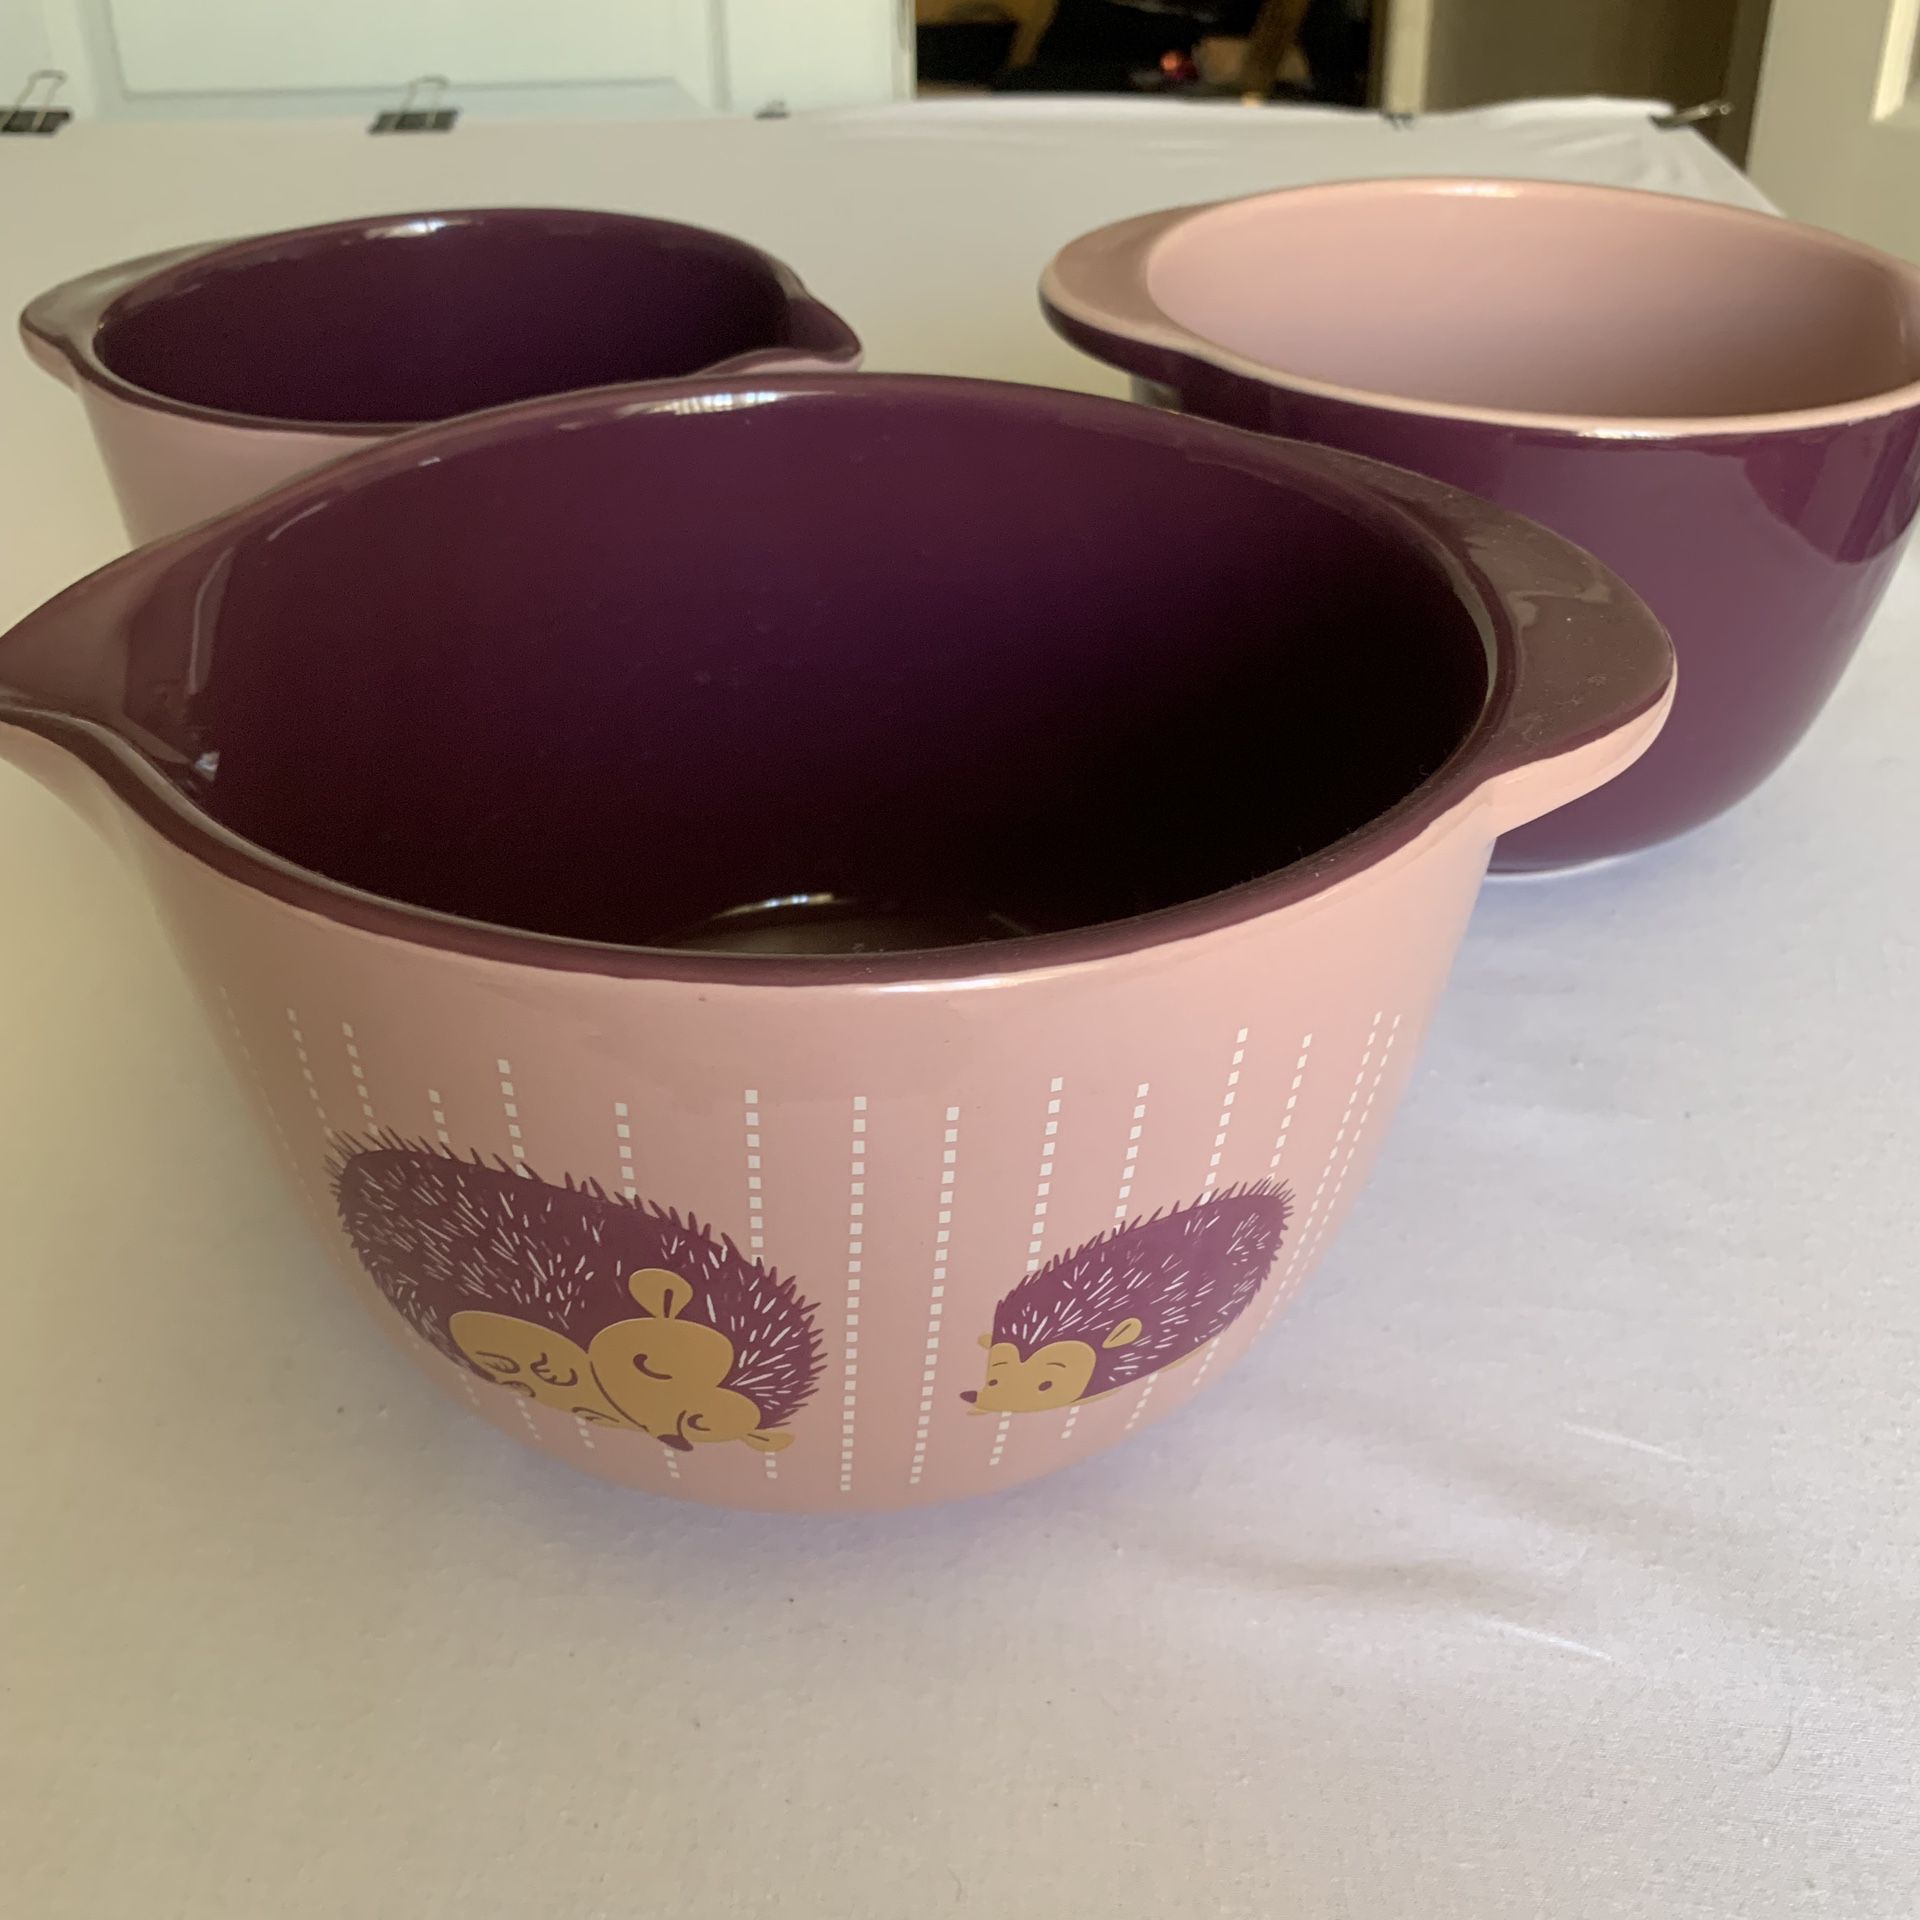 Cute hedgehog mixing bowls for Sale in Henderson, NV - OfferUp